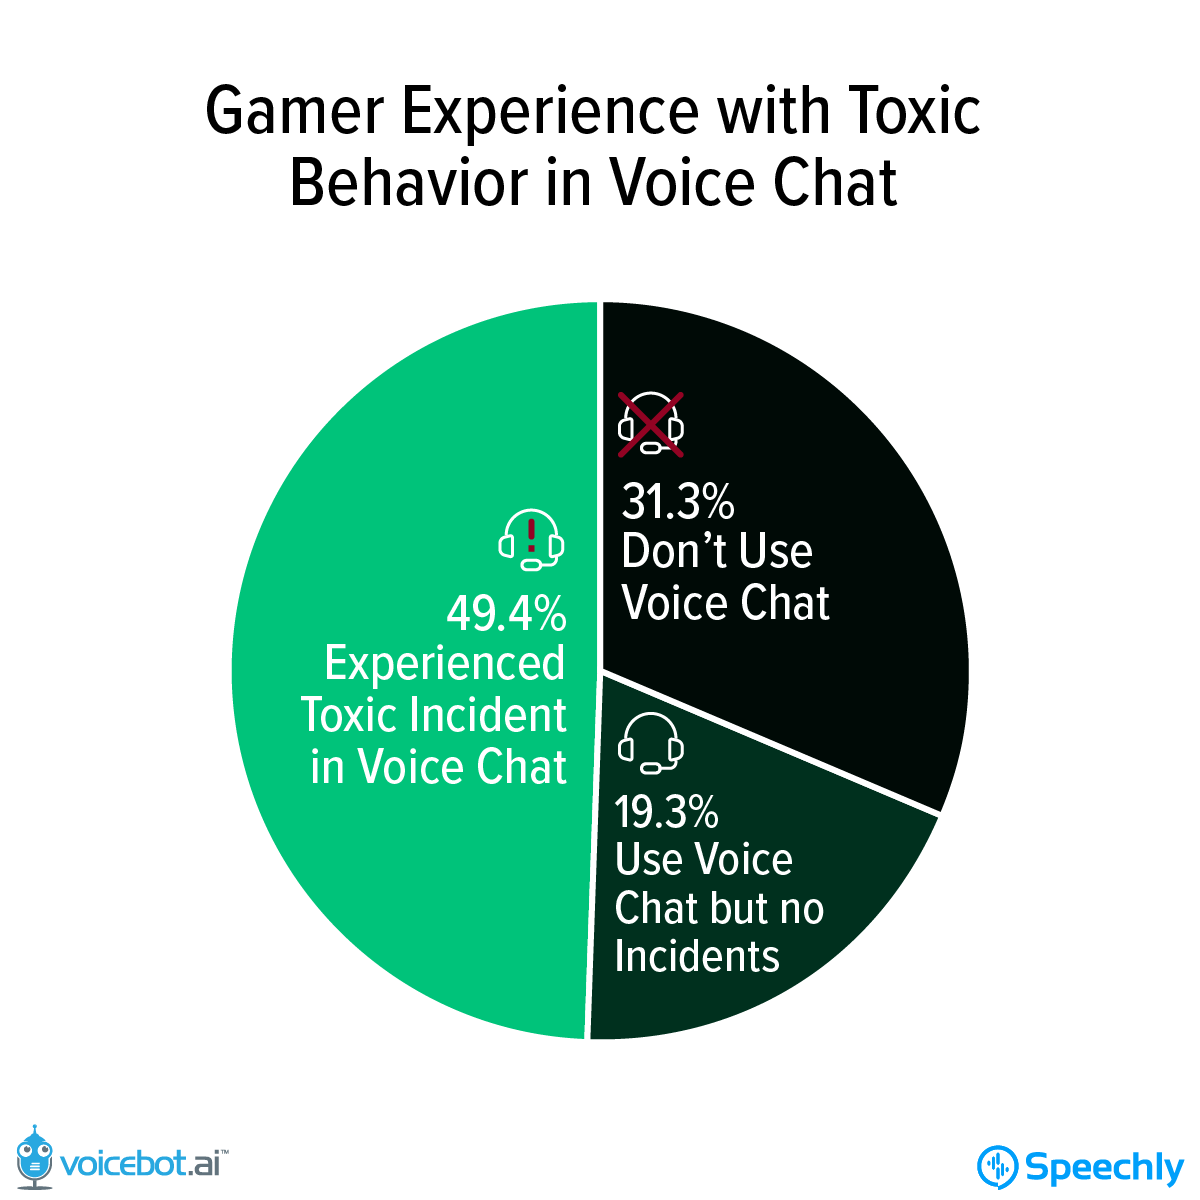 Gamer Experience With Toxic Behavior in Voice Chat